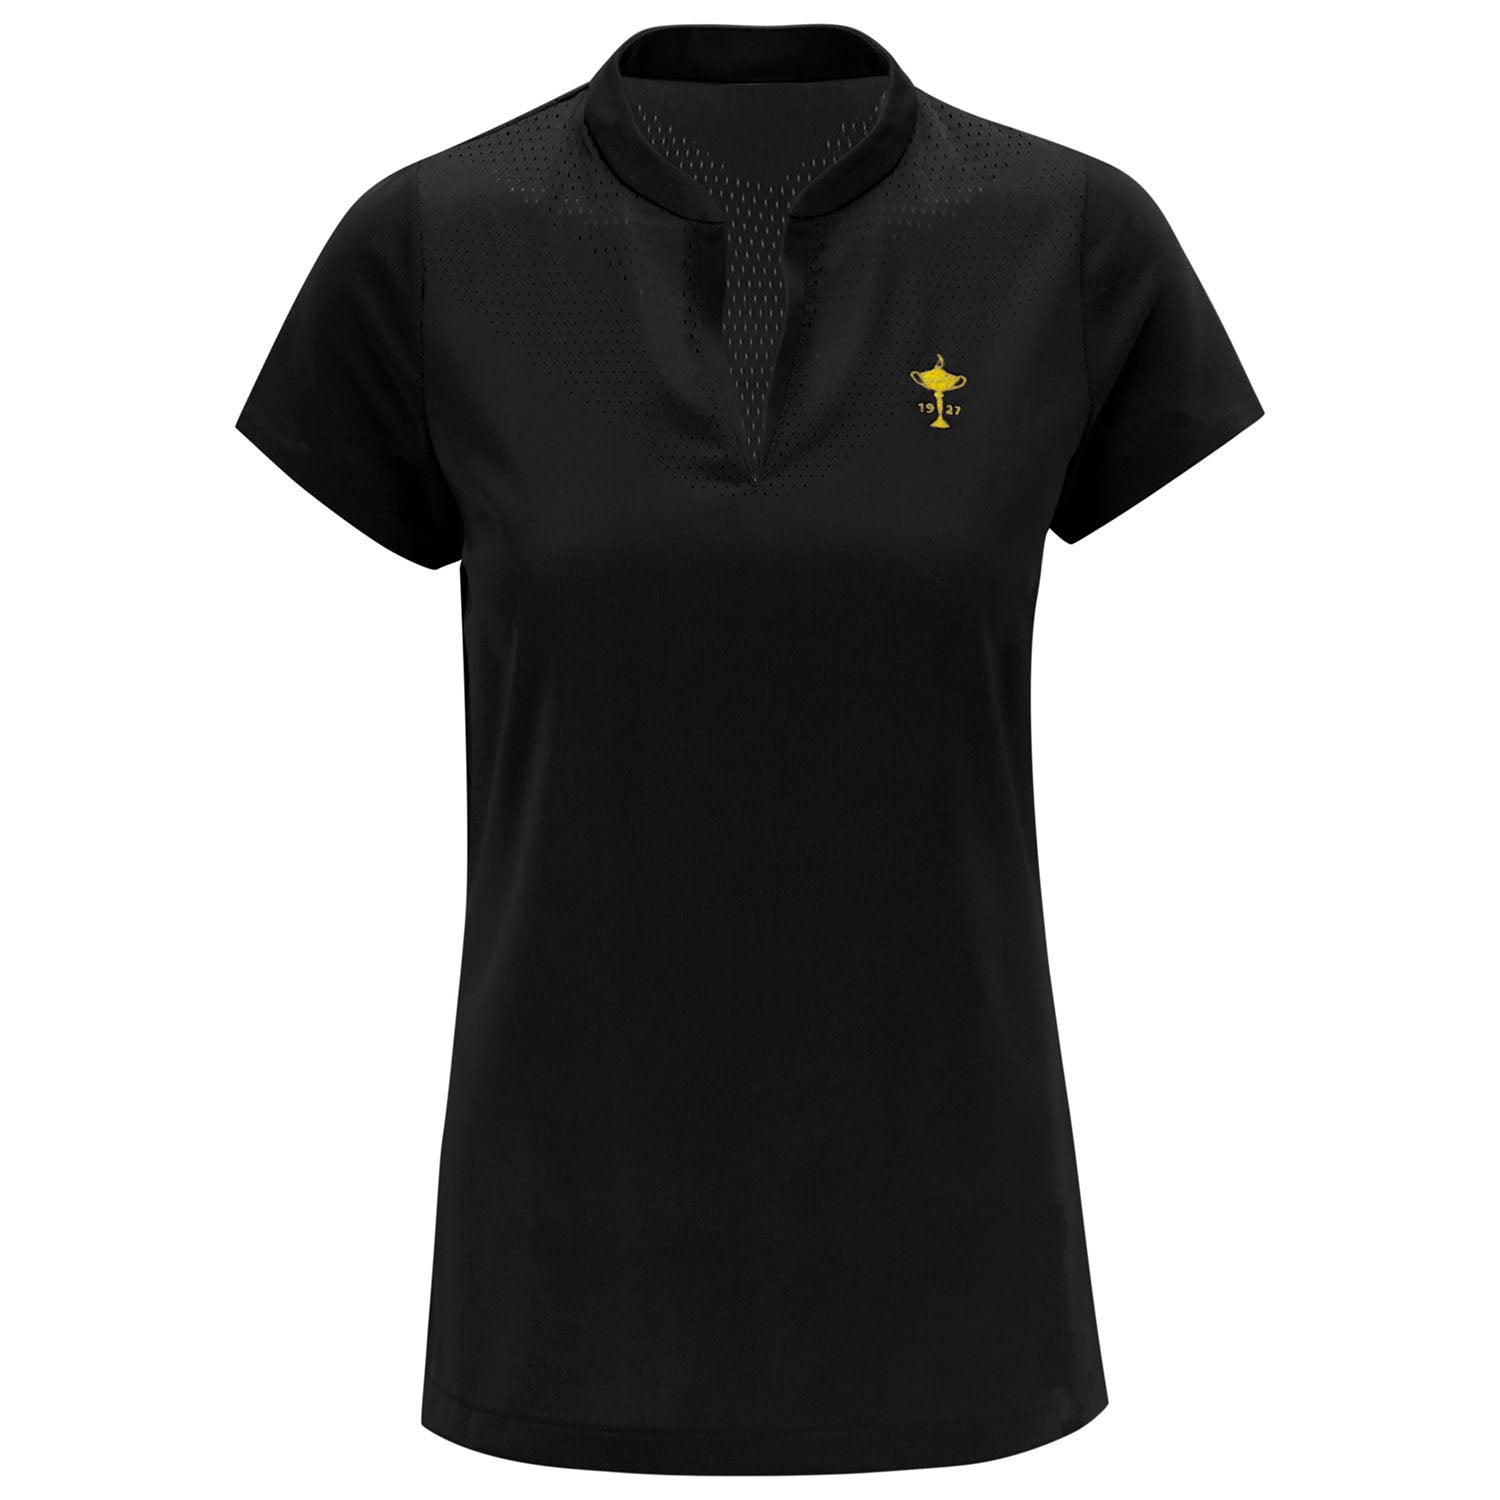 Nike Women's Ace Polo in Black- Front View